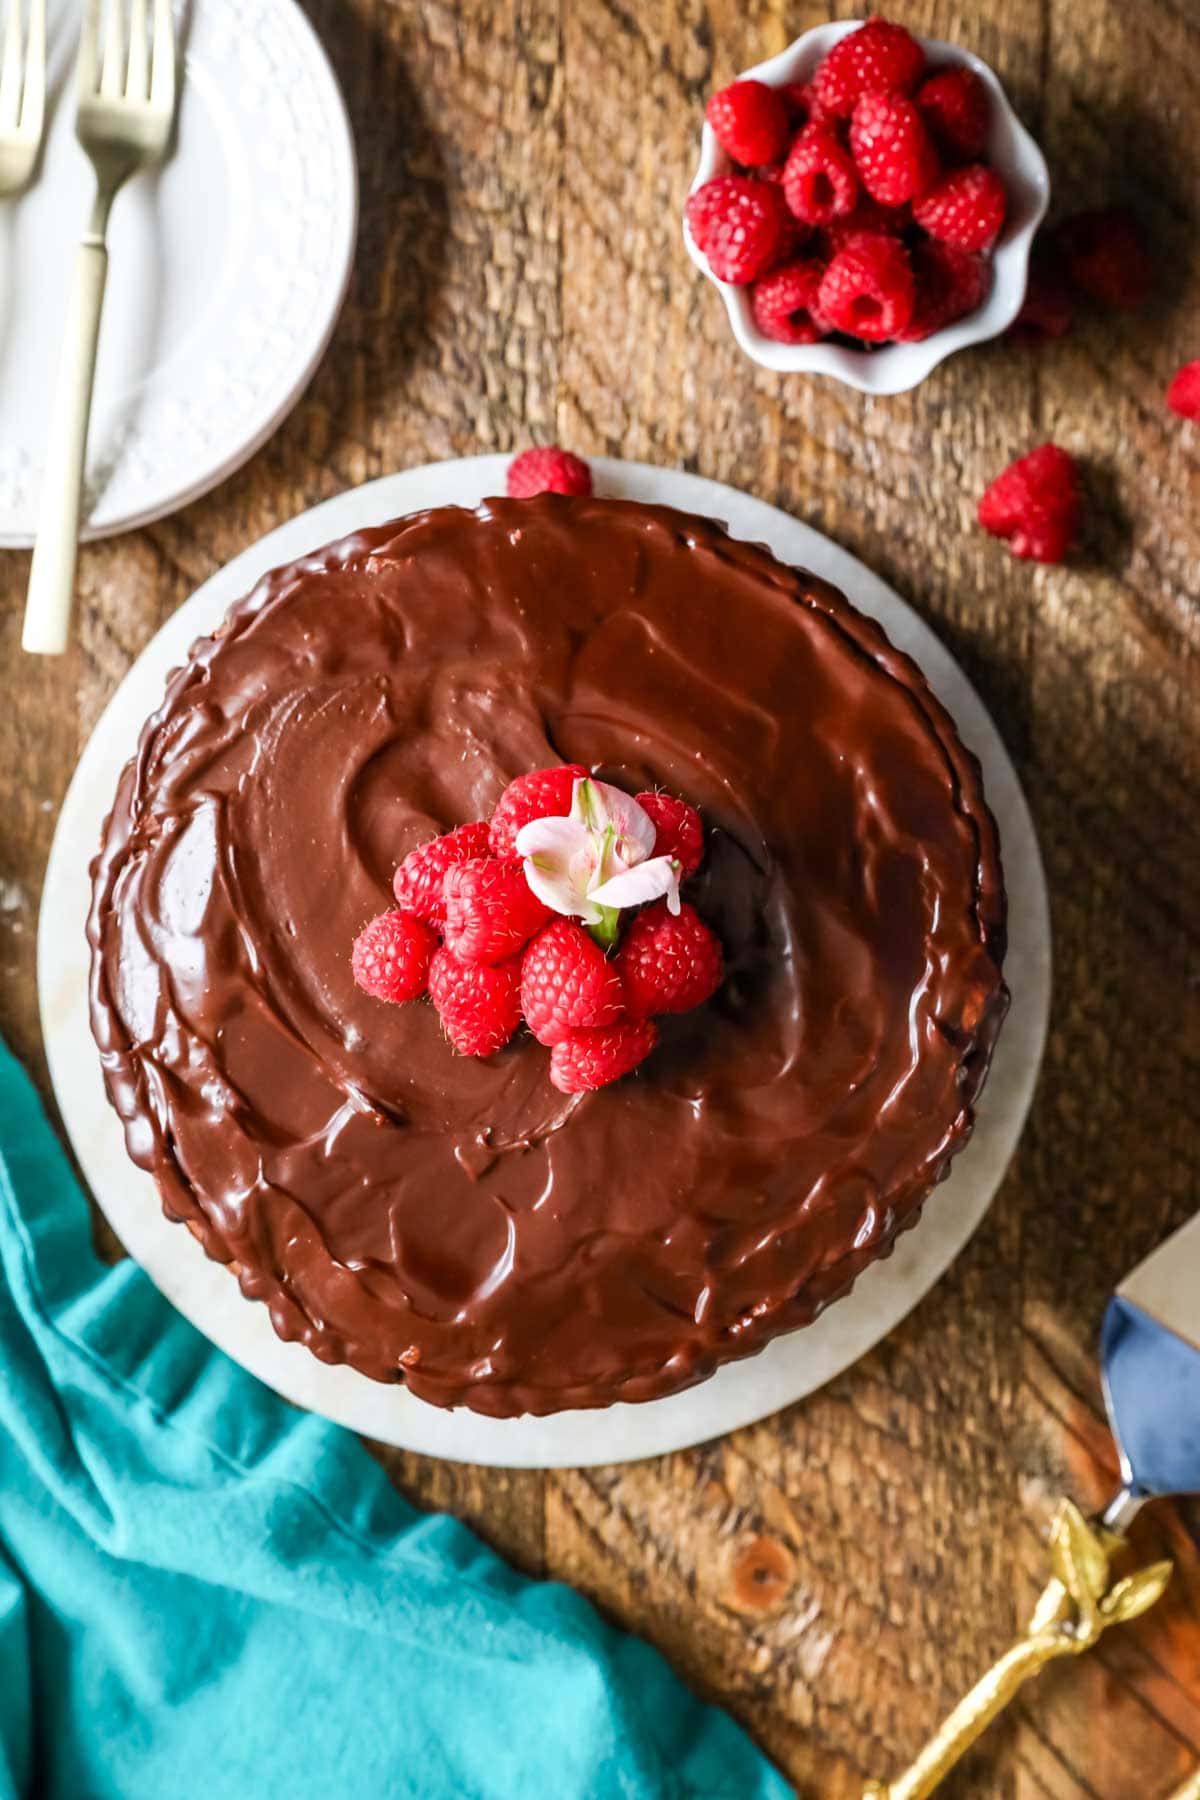 Overhead view of a cake topped with chocolate ganache and fresh raspberries.